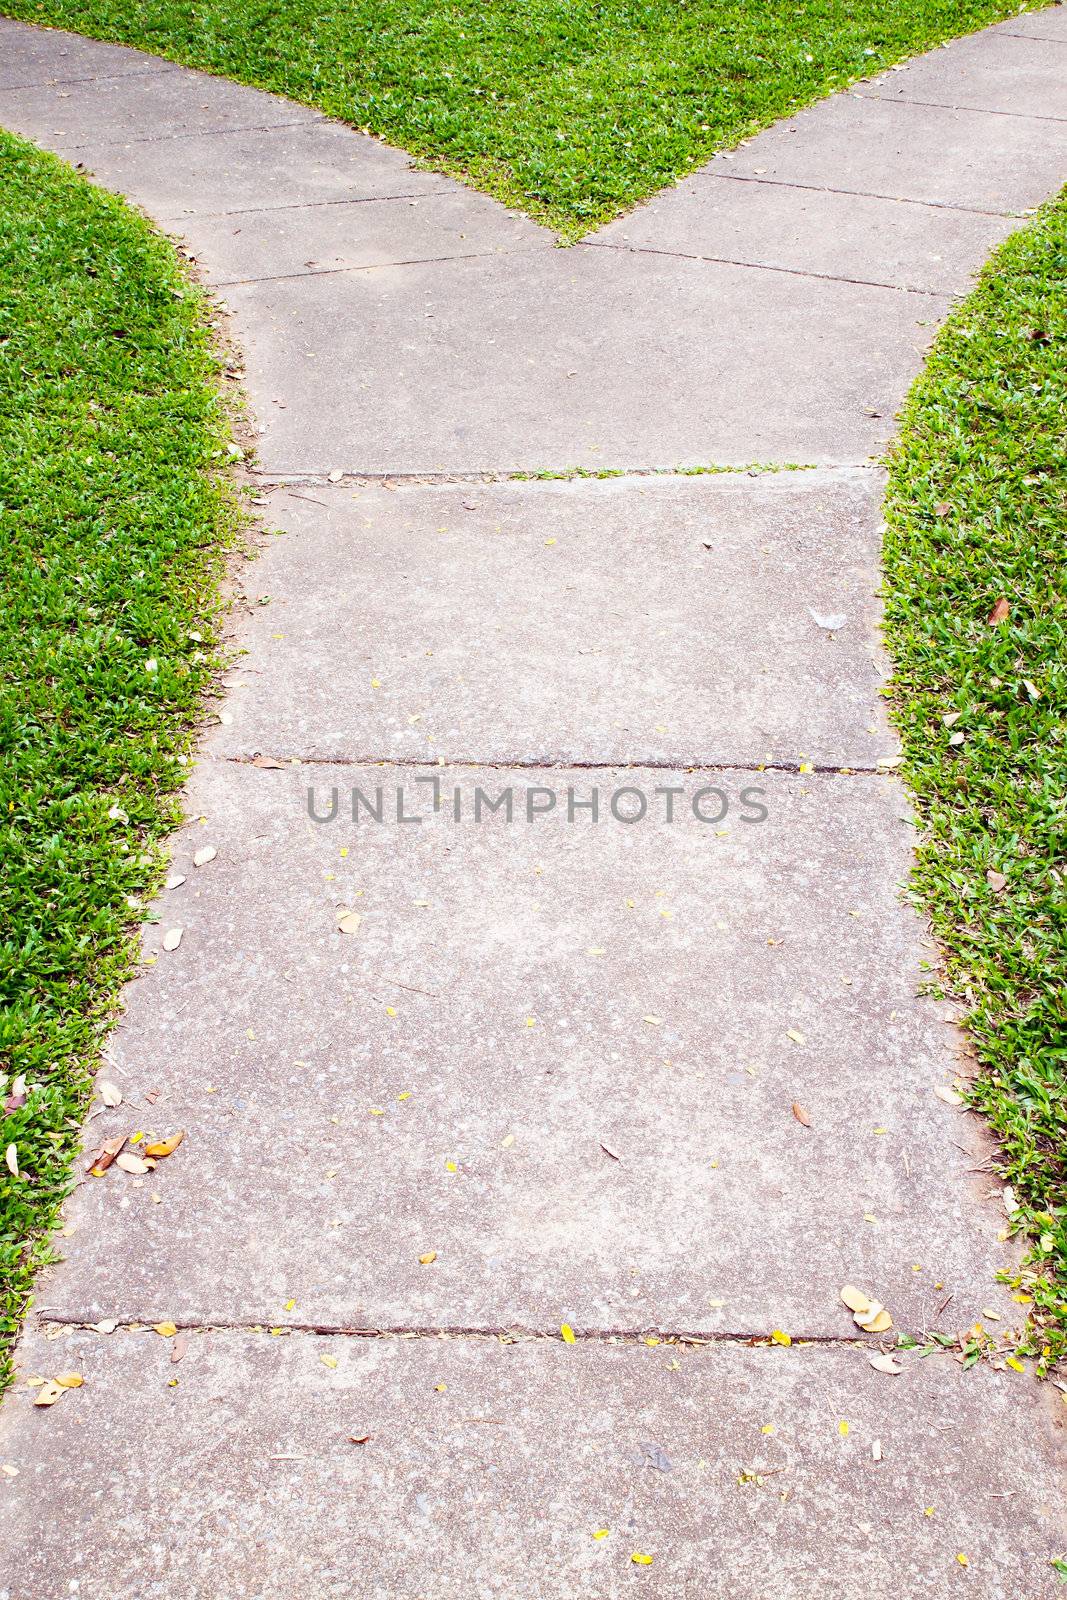 Fork in the pathway with grass